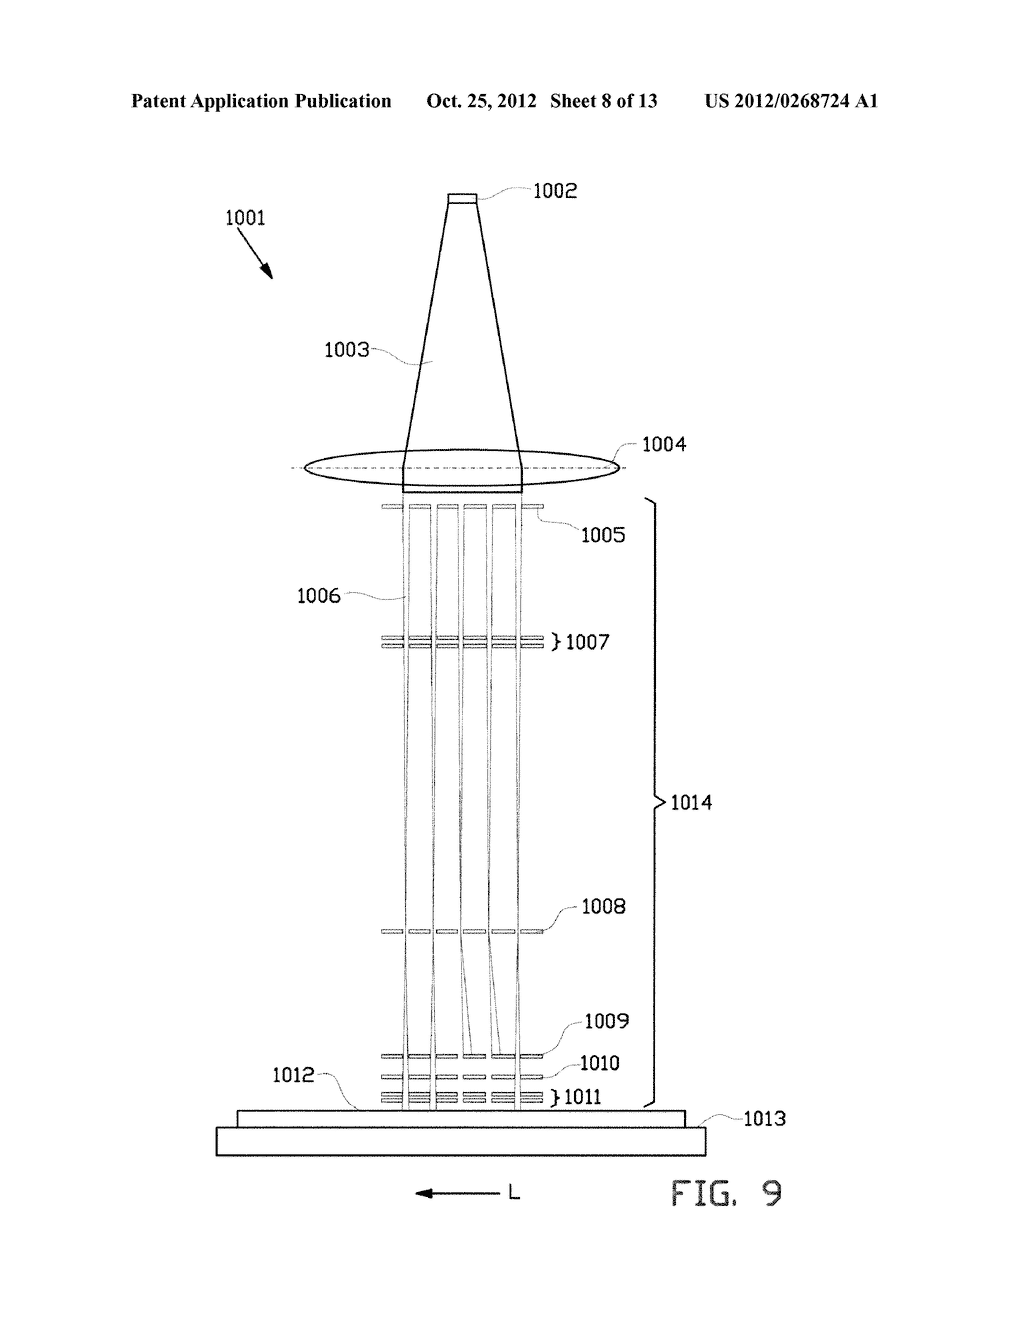 LITHOGRAPHY SYSTEM FOR PROCESSING A TARGET, SUCH AS A WAFER, A METHOD FOR     OPERATING A LITHOGRAPHY SYSTEM FOR PROCESSING A TARGET, SUCH AS A WAFER     AND A SUBSTRATE FOR USE IN SUCH A LITHOGRAPHY SYSTEM - diagram, schematic, and image 09